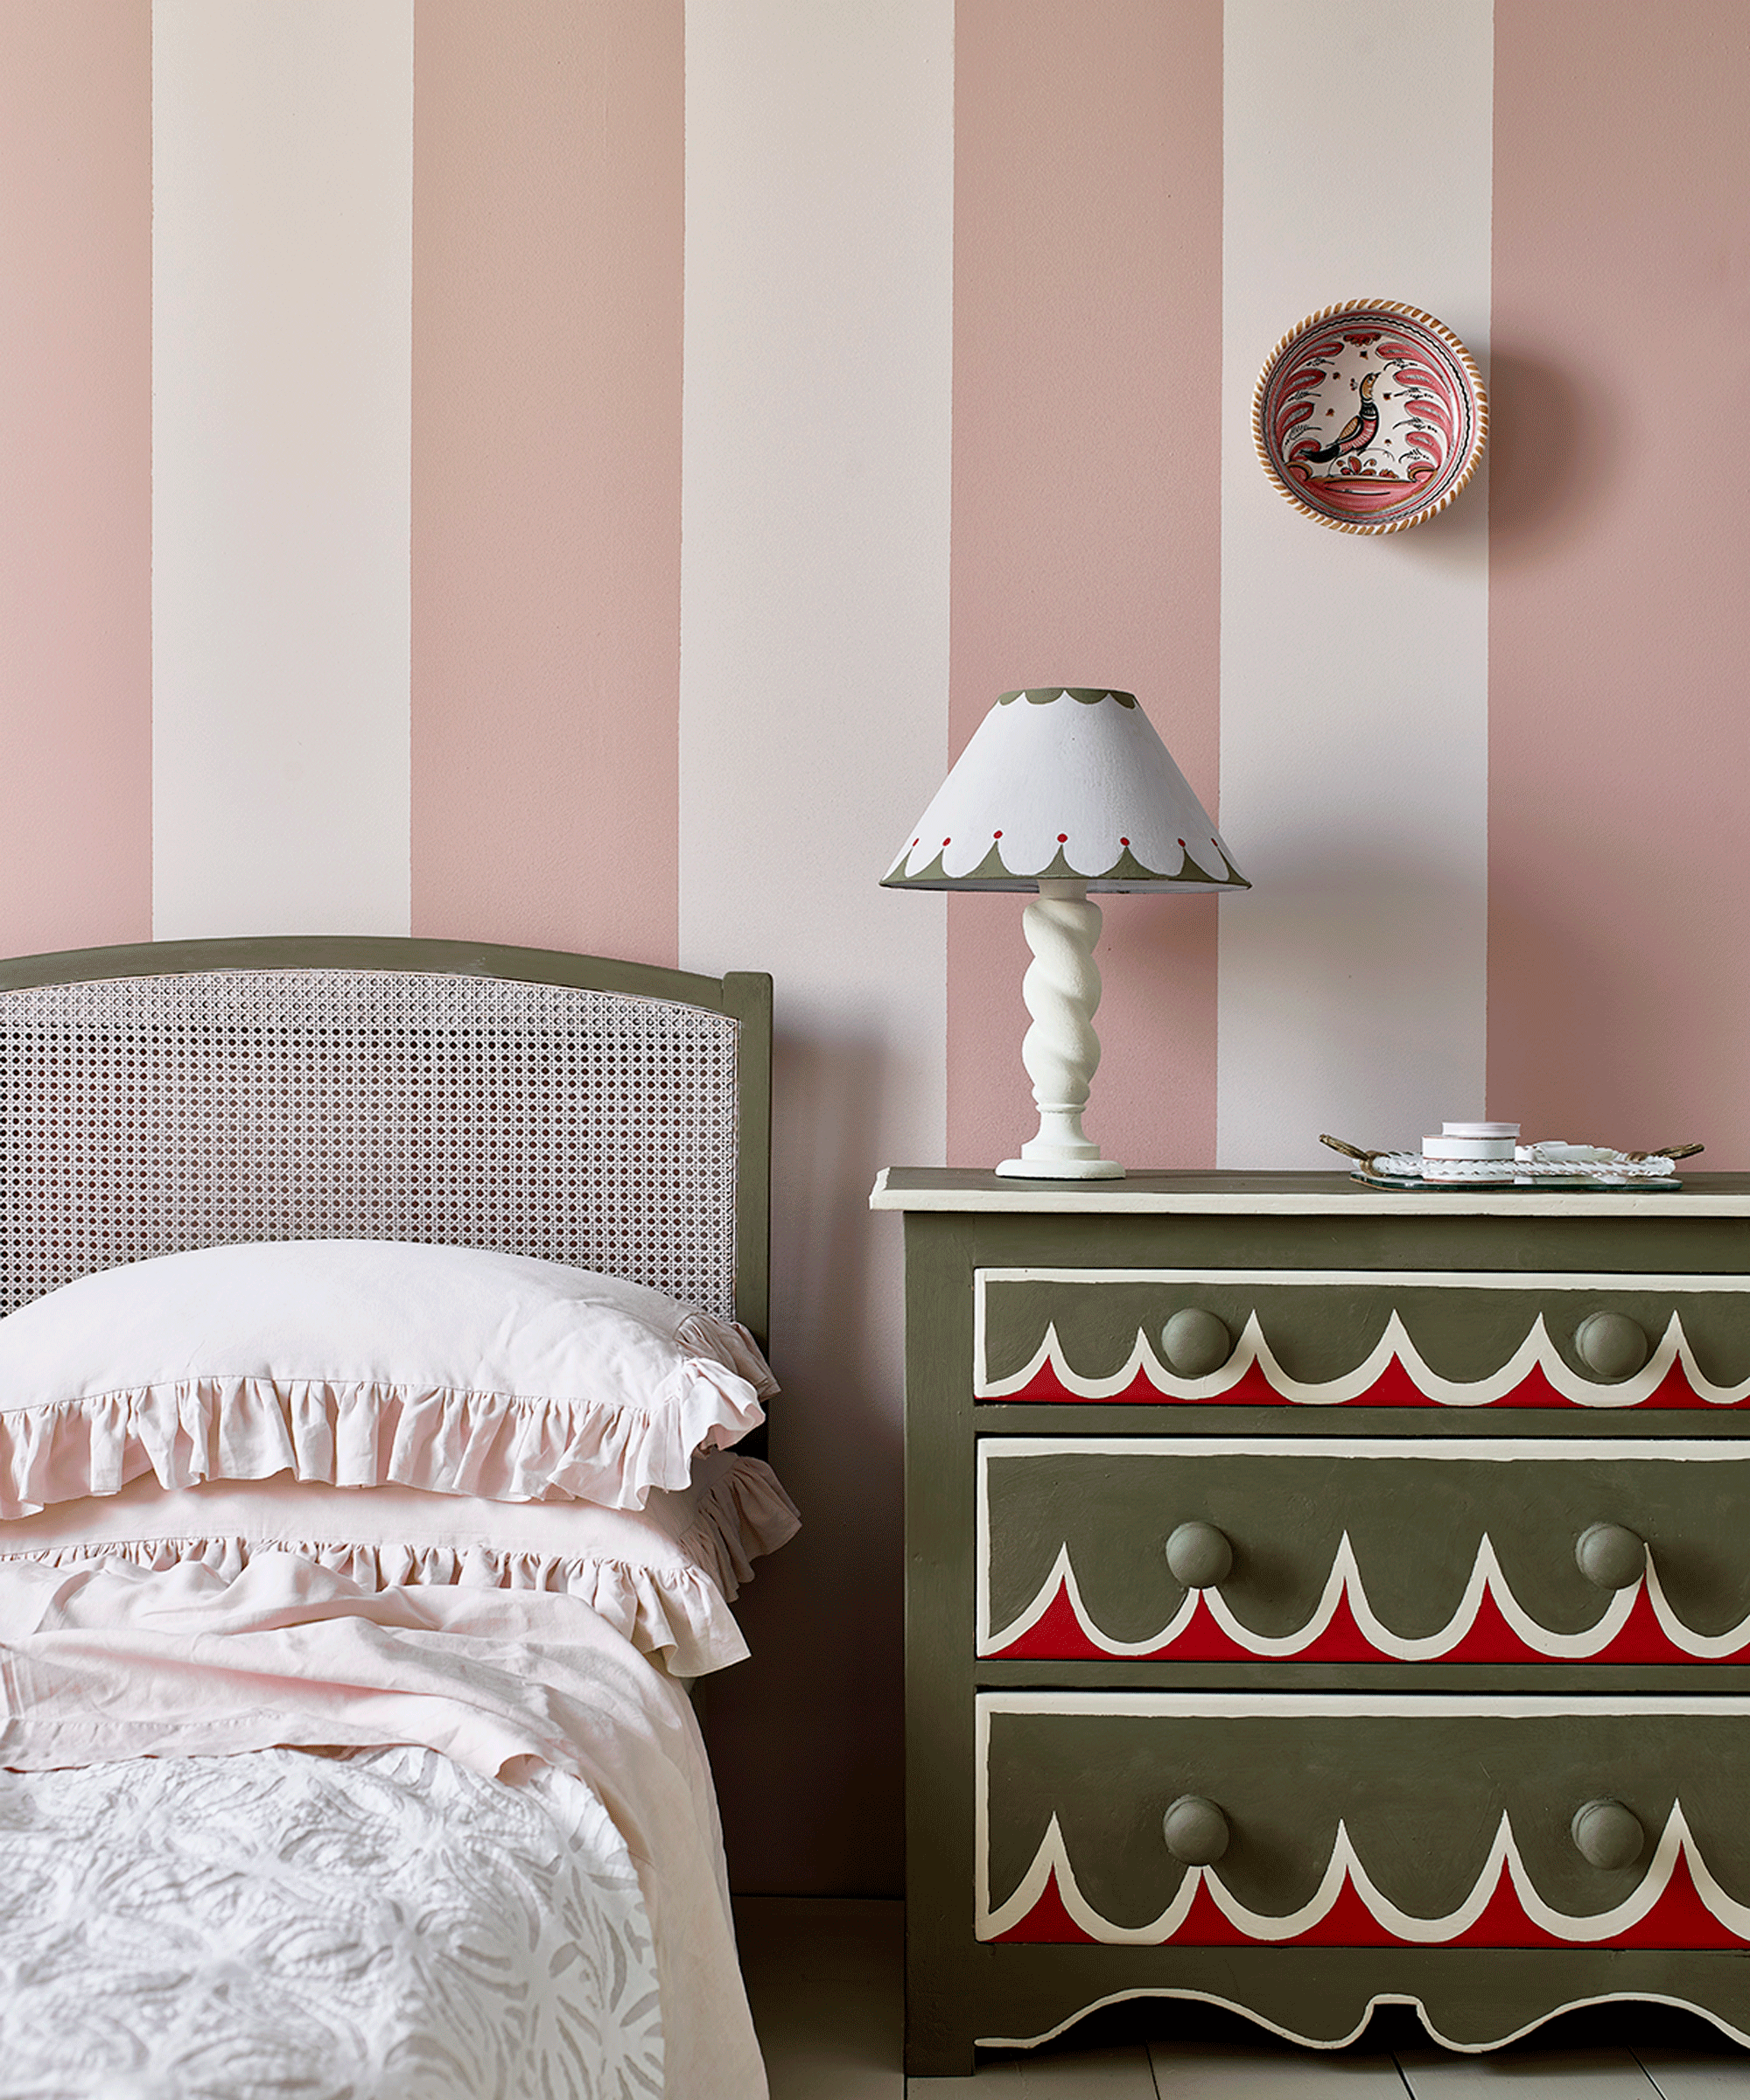 Bedroom with pink and white walls and decorative bedside table